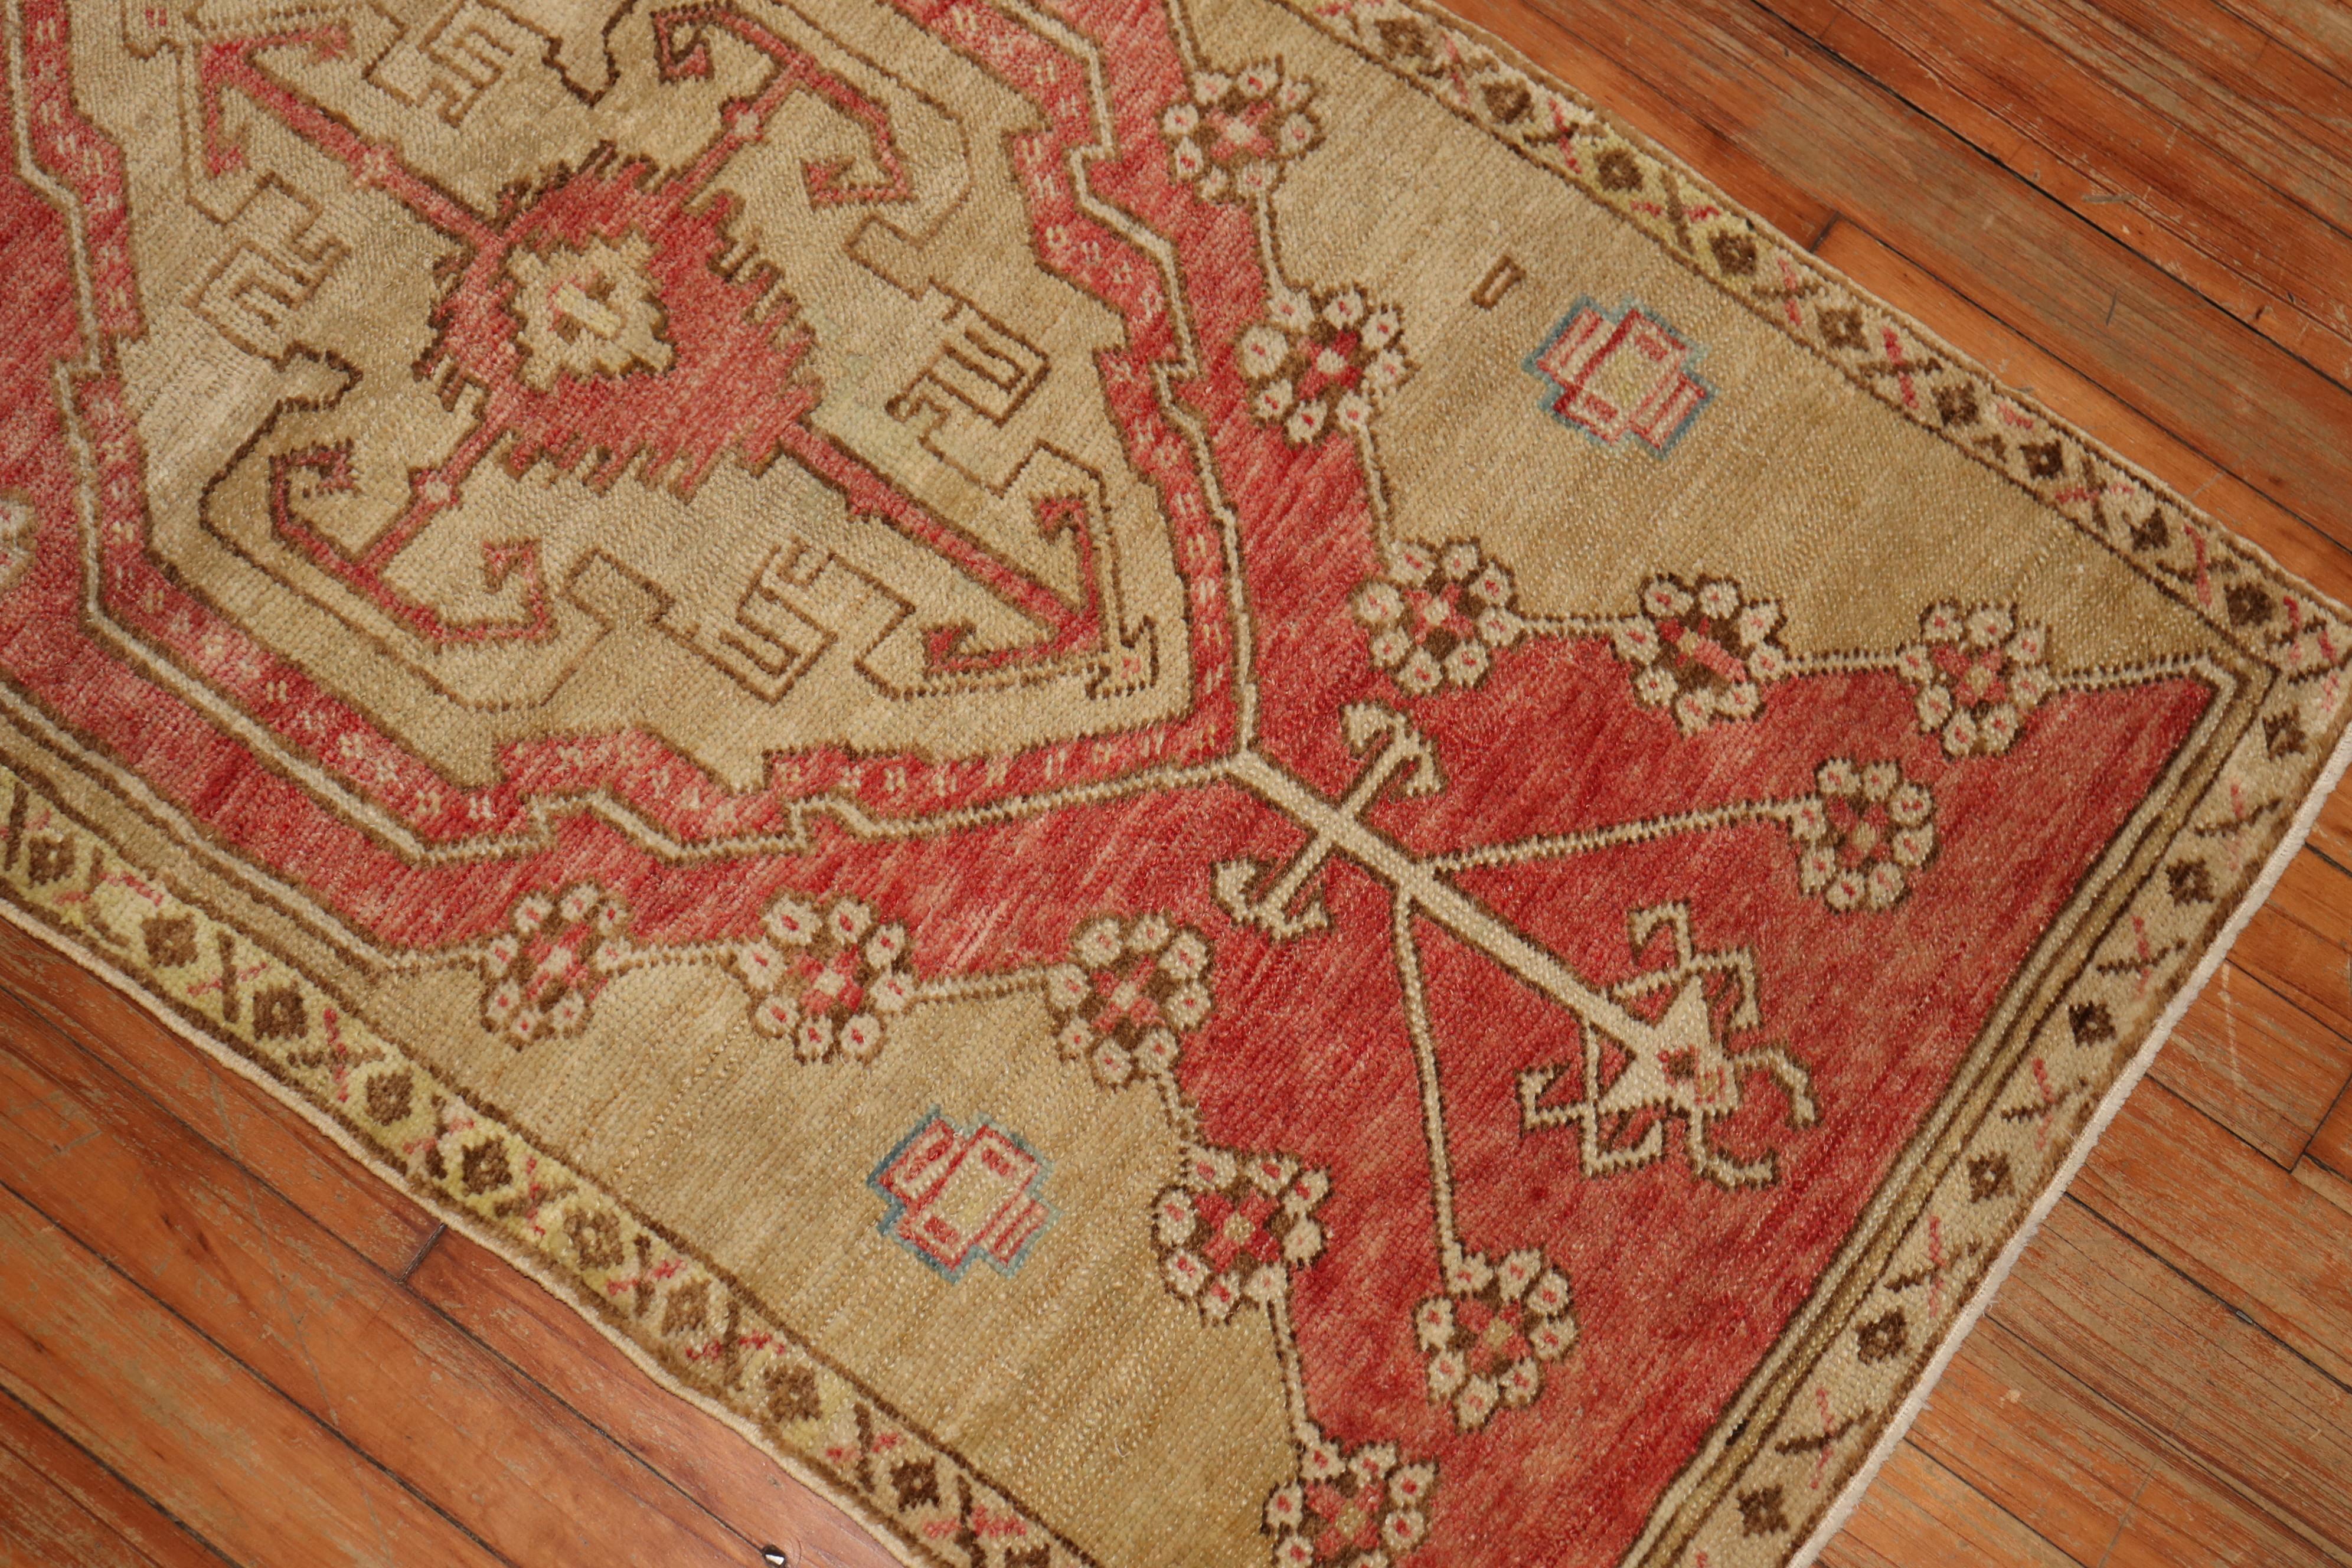 1940s Turkish Oushak Runner with a soft red ground accents in khaki, brown and light blue accents

Measures: 2' x 9'1.